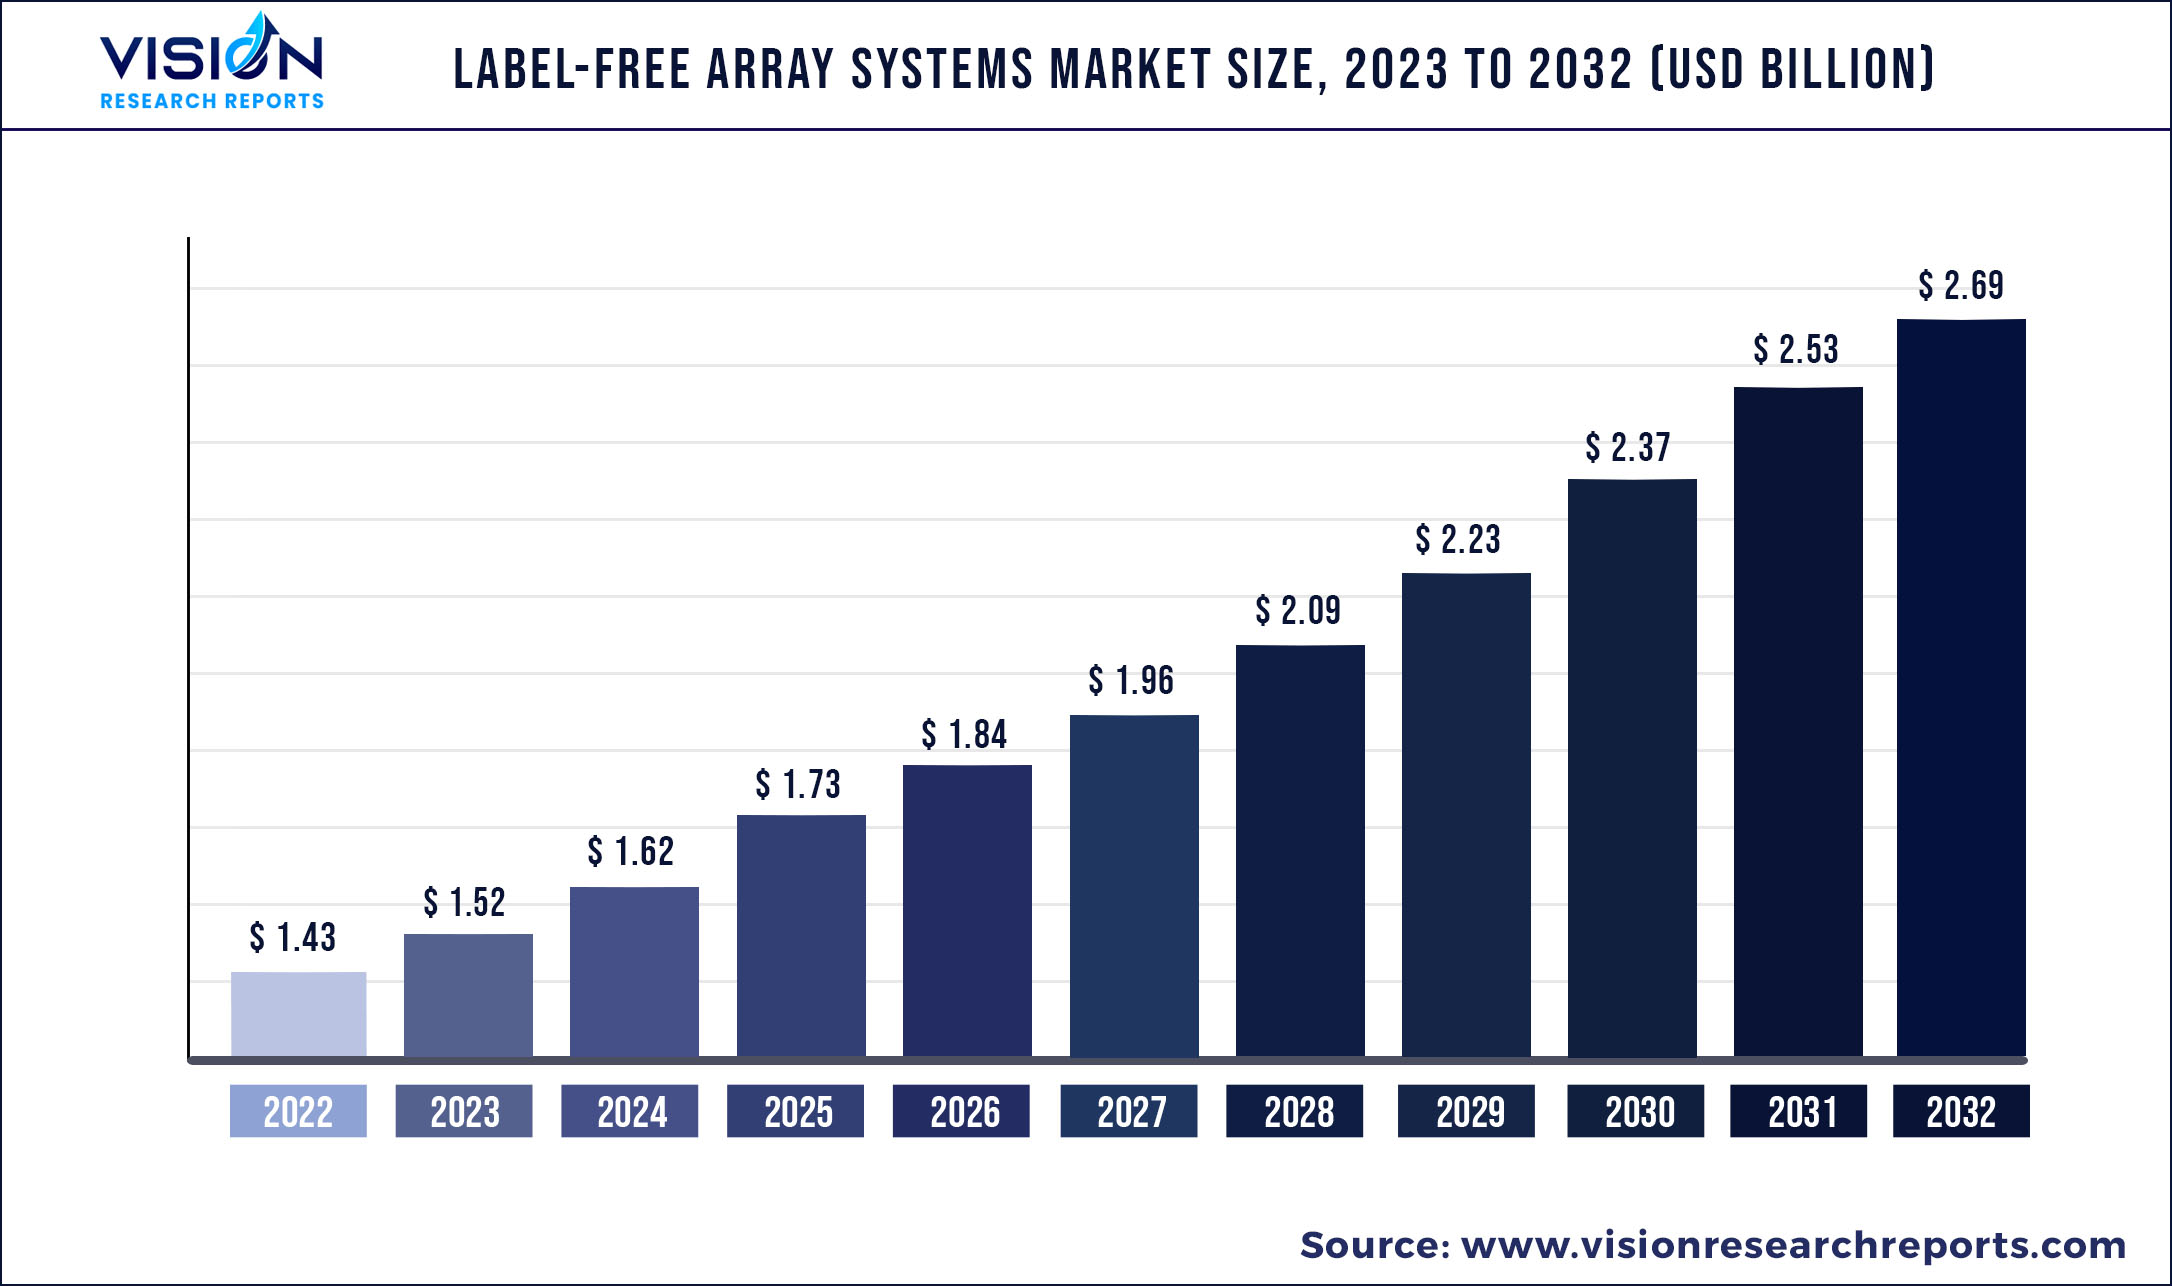 Label-free Array Systems Market Size 2023 to 2032